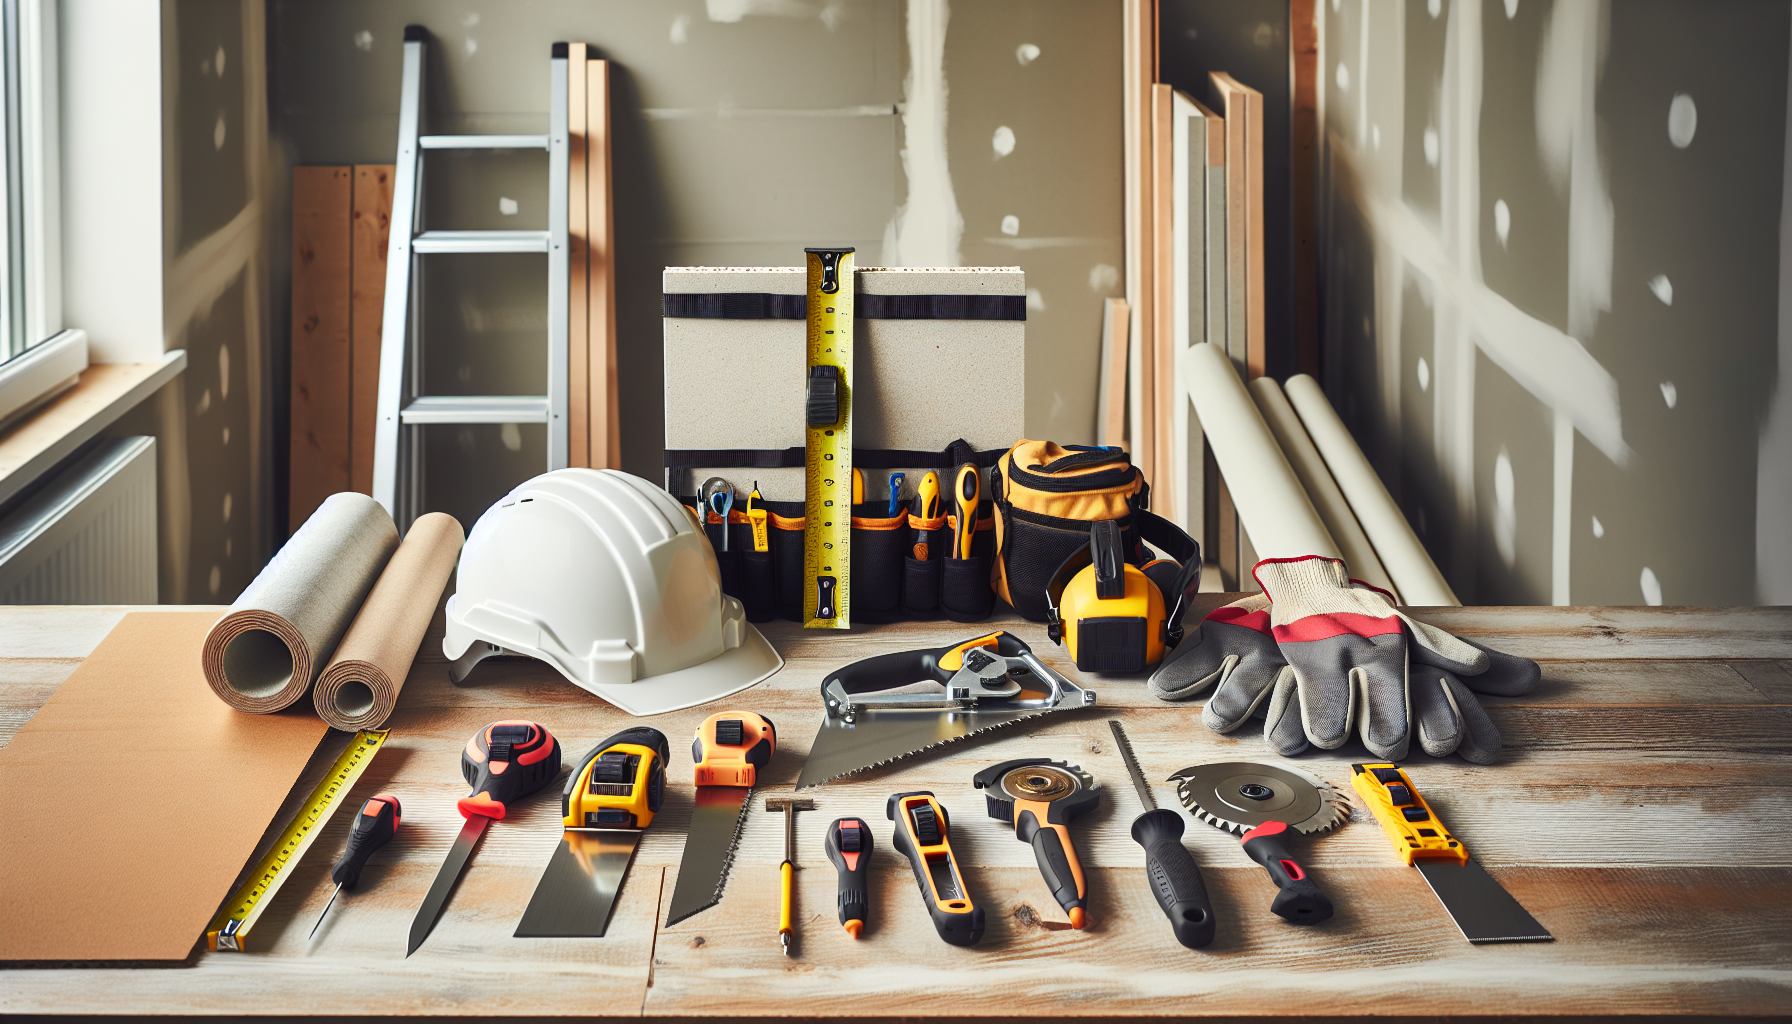 Various tools and accessories for drywall projects